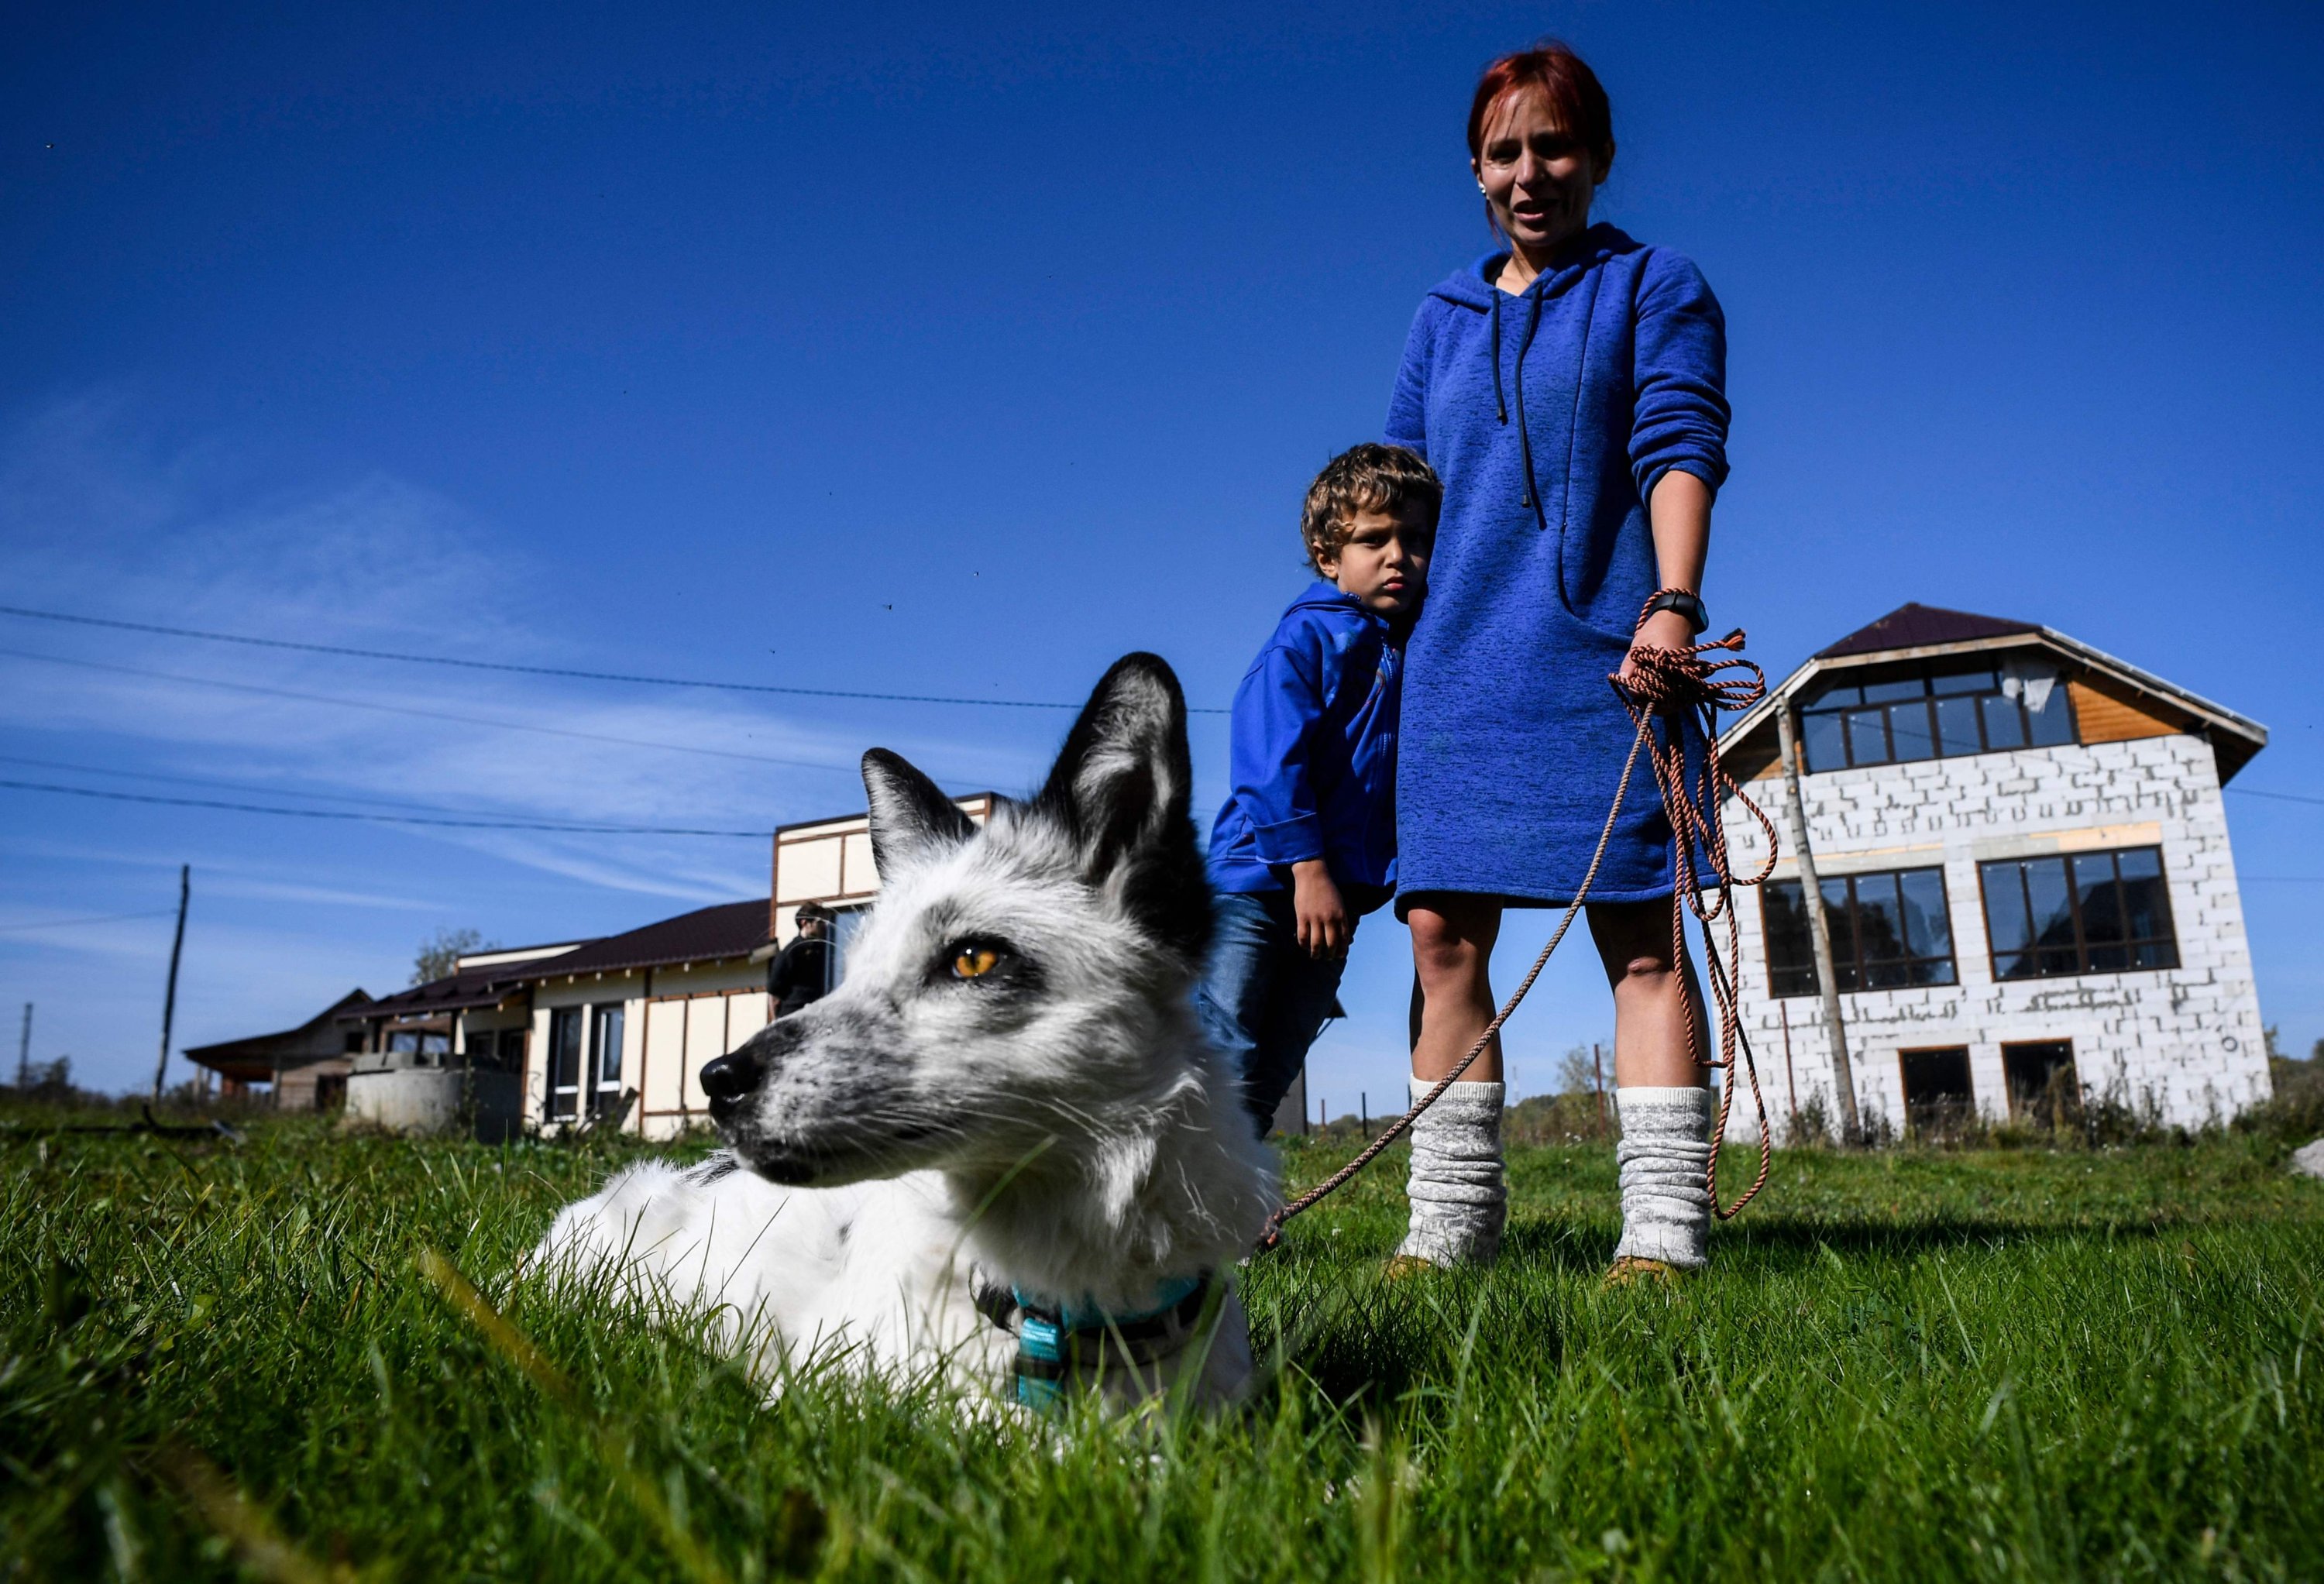 Tatyana Abramova, 33, and her son Timofei, 6, walk with their pet fox Plombir at their countryside house outside Siberian city of Novosibirsk on Sept. 12, 2020.  (AFP Photo)